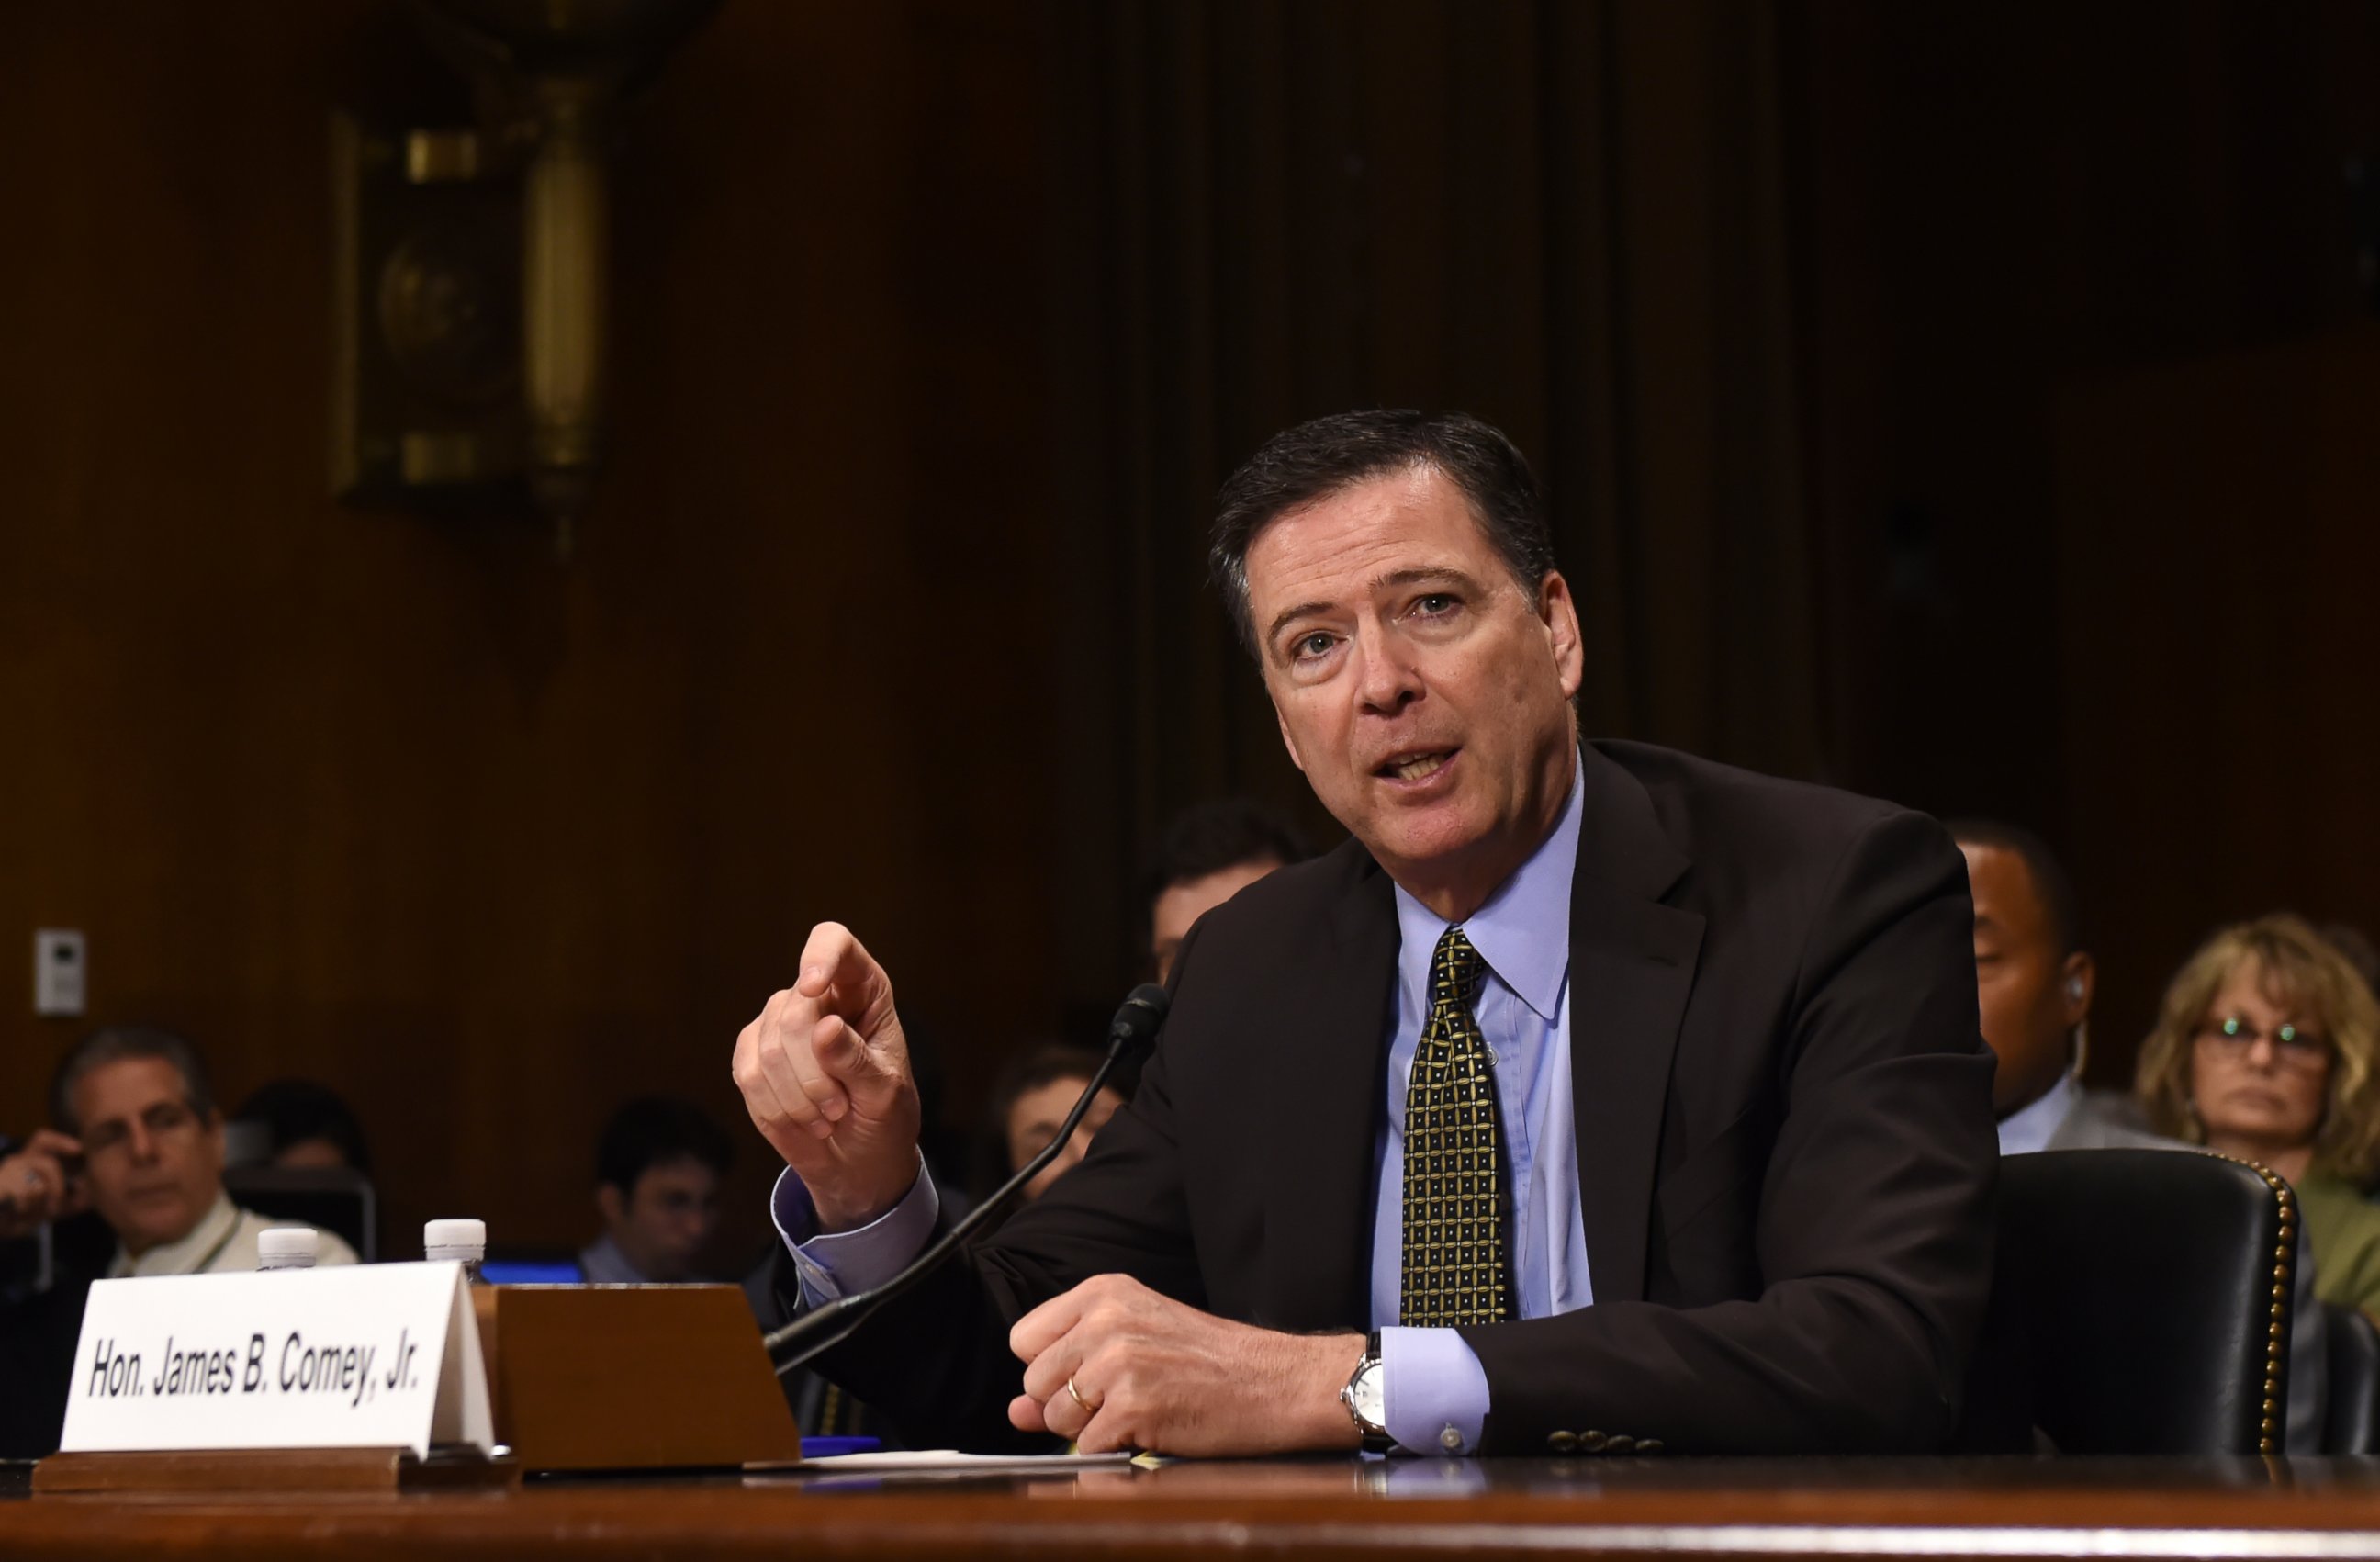 PHOTO: James Comey, the director of Federal Bureau of Investigation, testifies before the Senate Judiciary Committee during a hearing in Washington D.C., May 3, 2017.